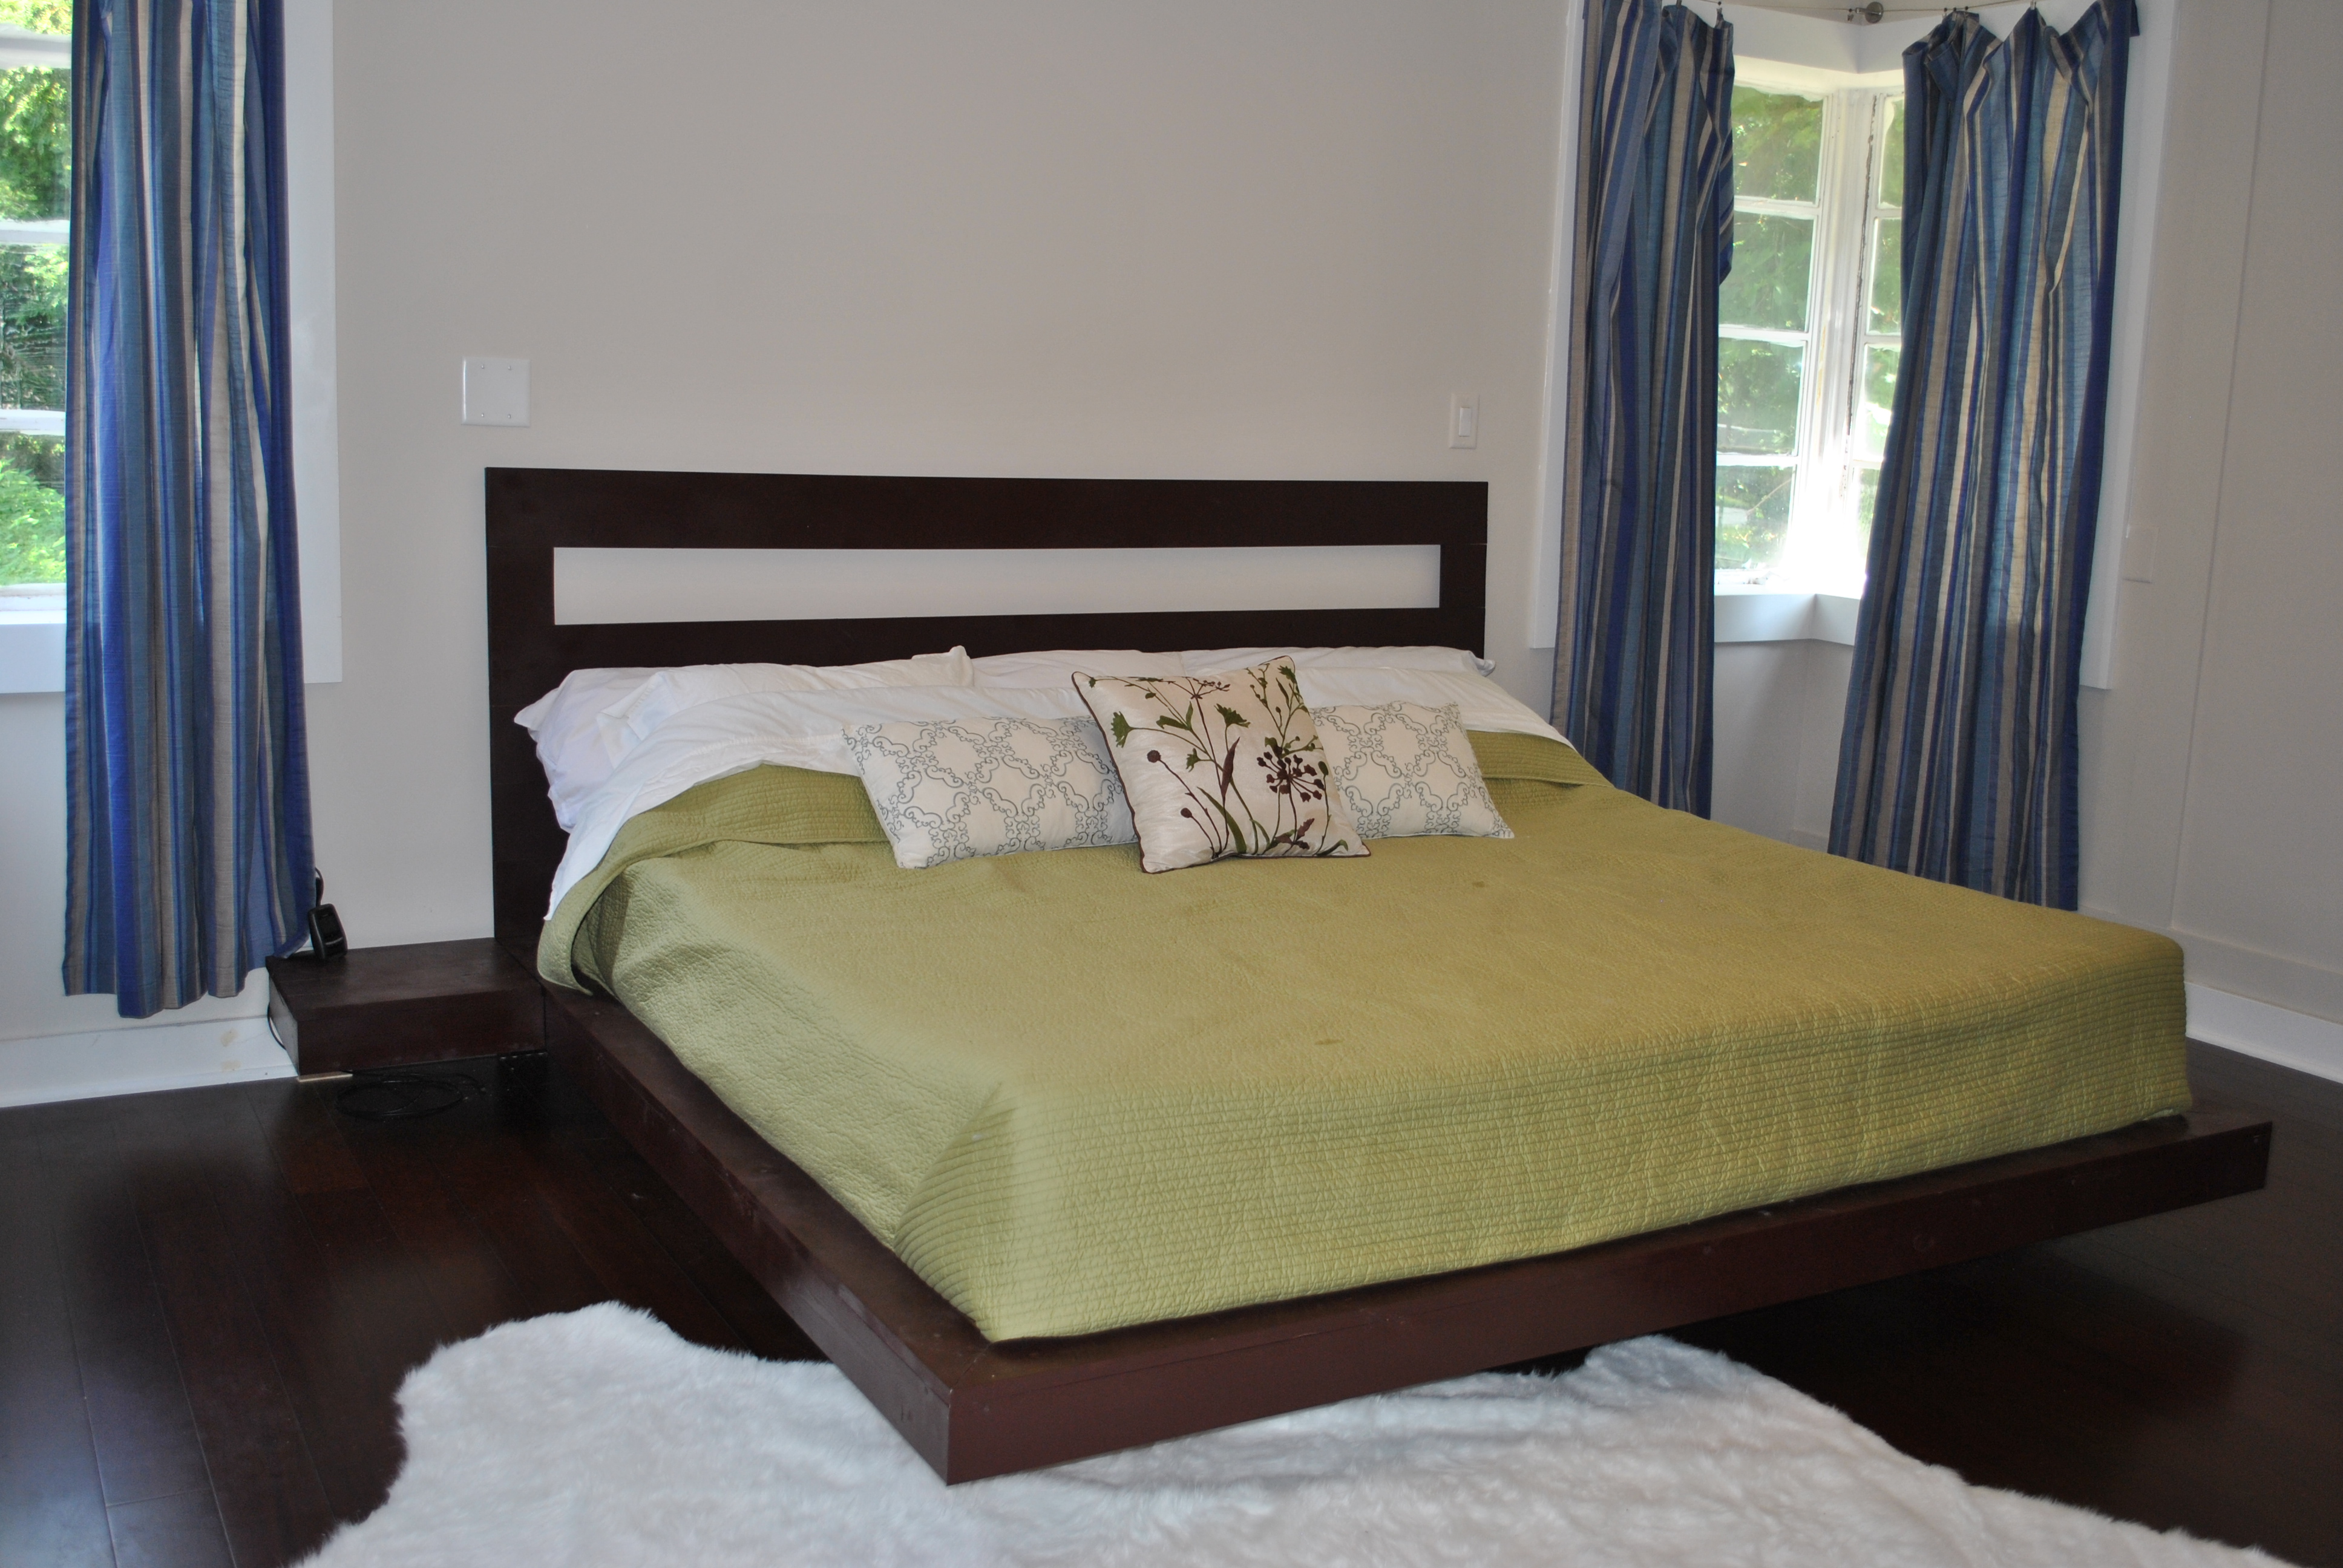 25 Simple Cut Out Headboard And 25 Floating Platform King